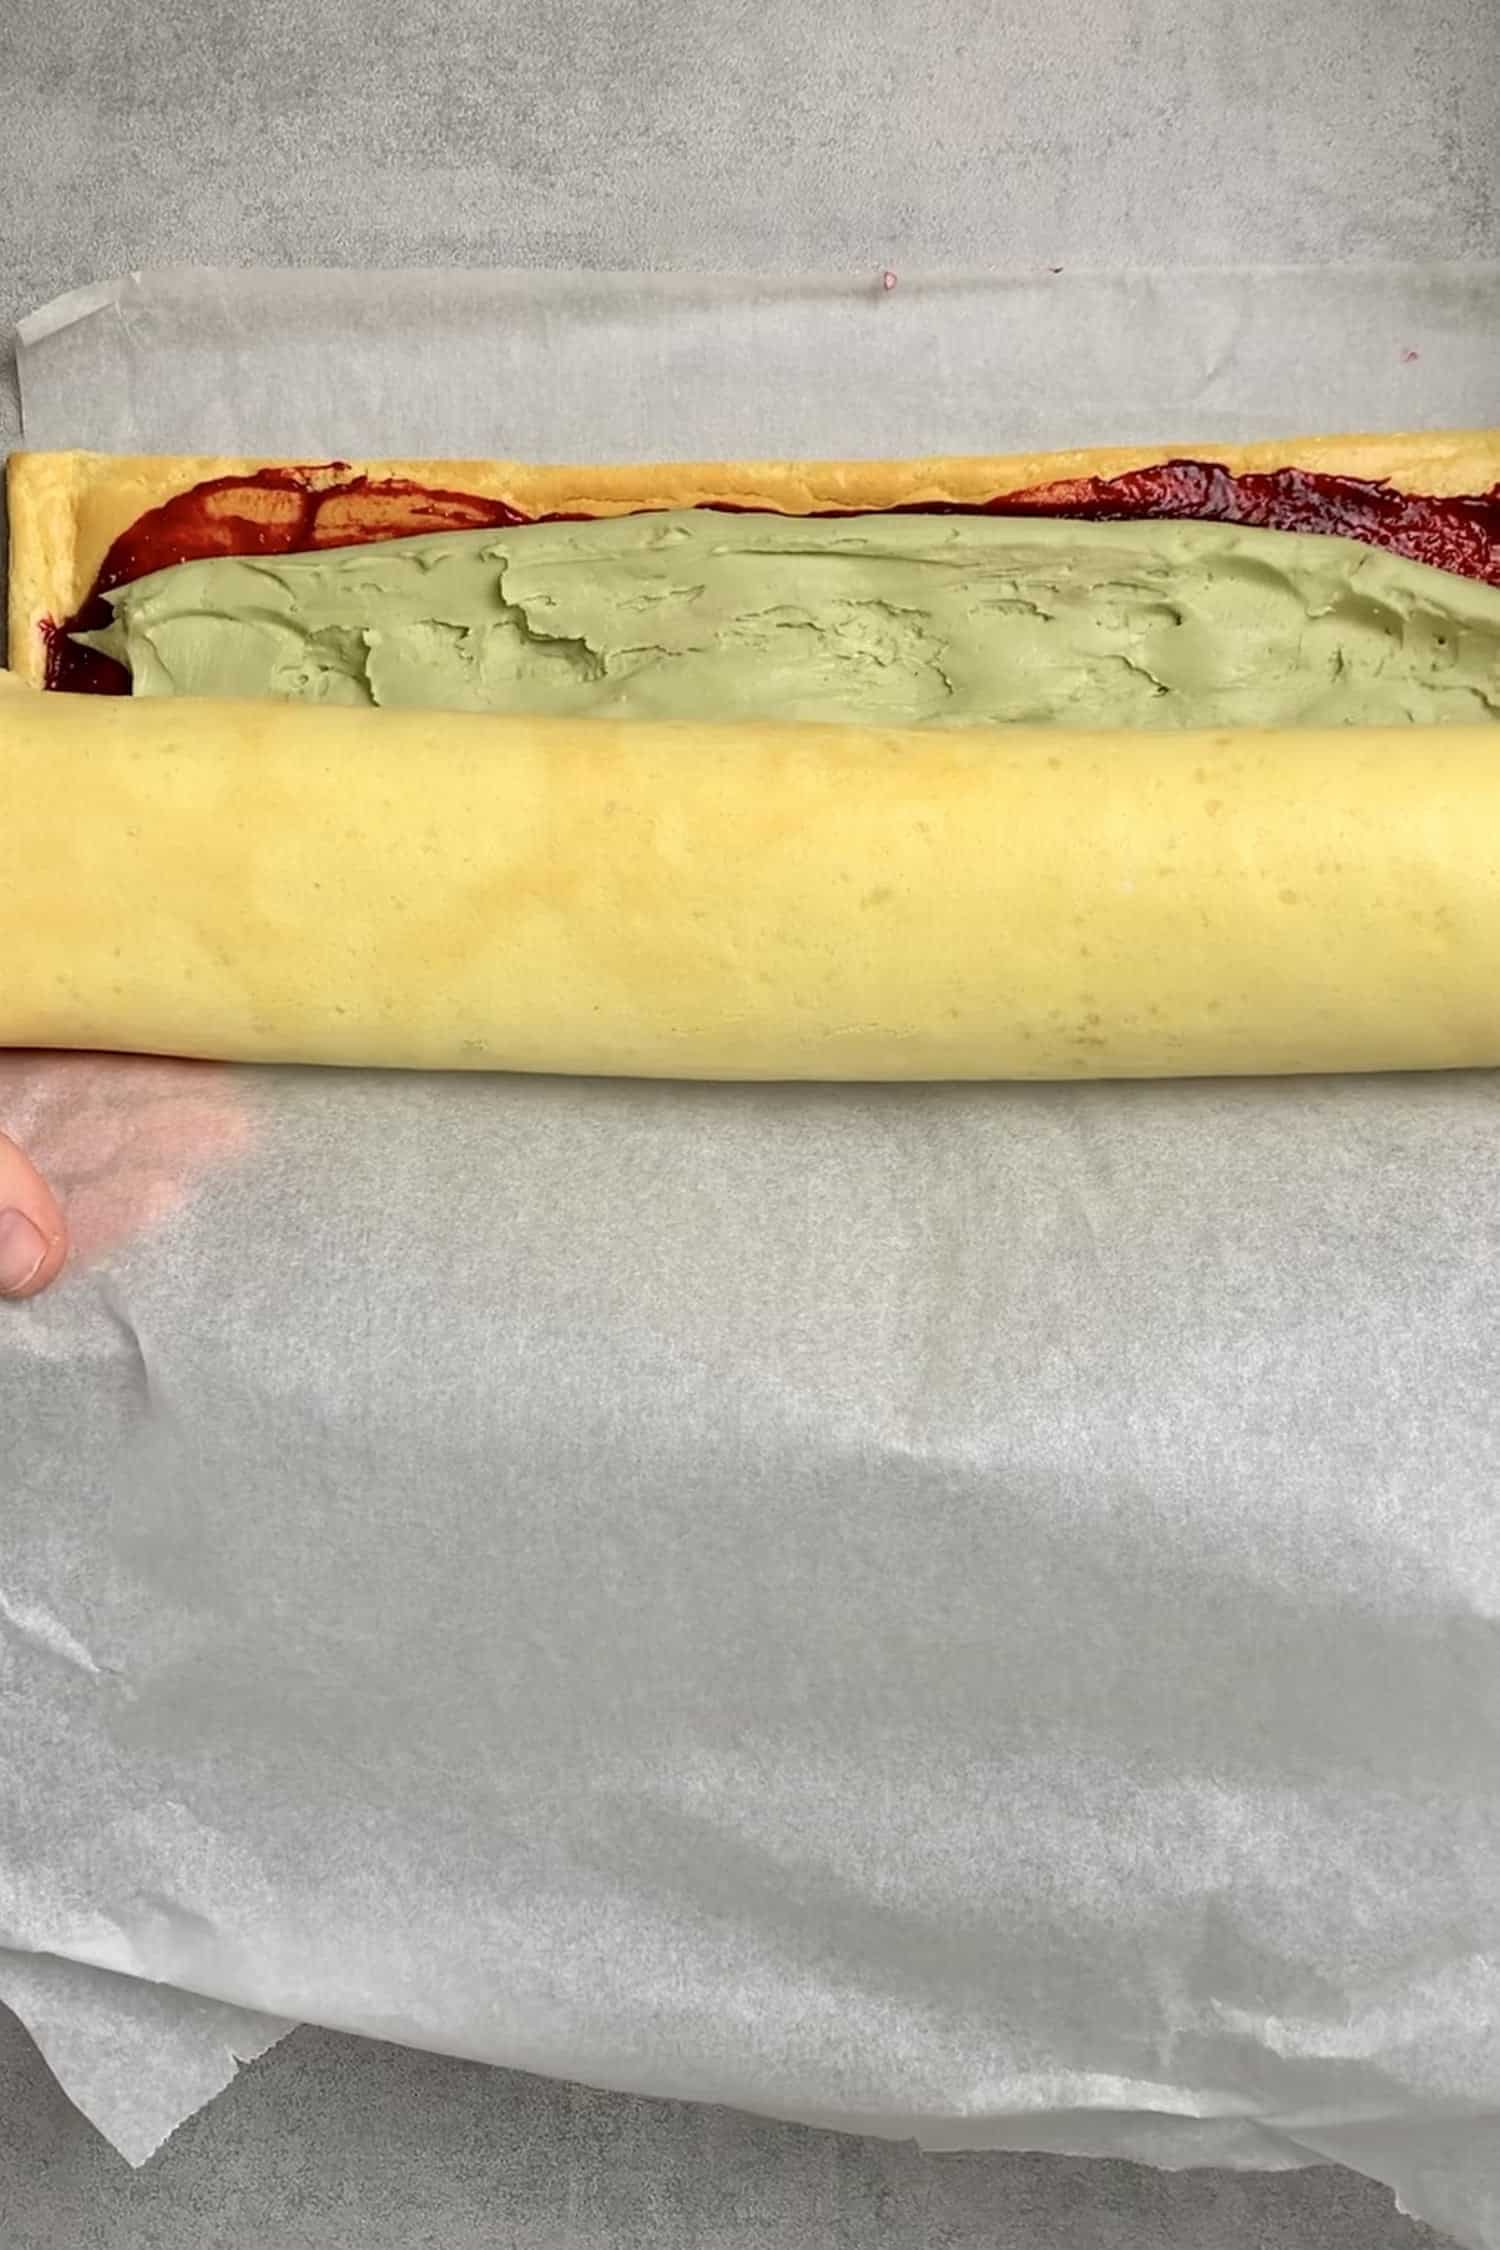 Rolling up the cake roll.